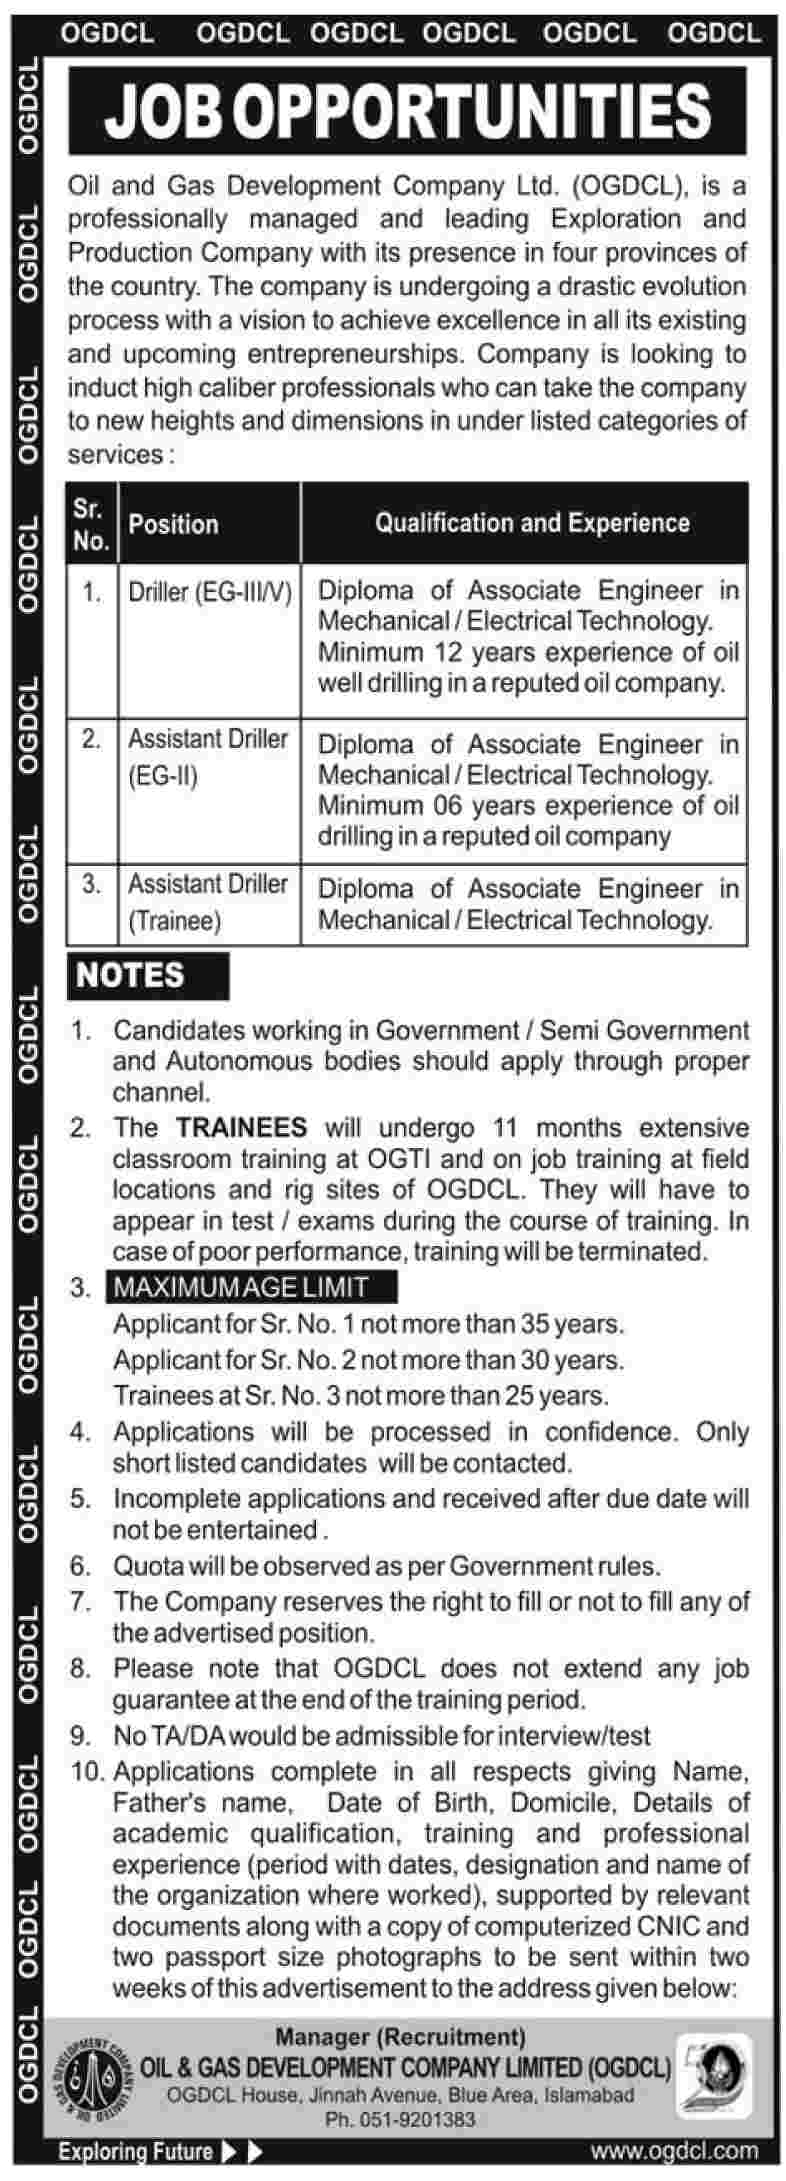 Jobs in Oil & Gas Development Company Limited (OGDCL)